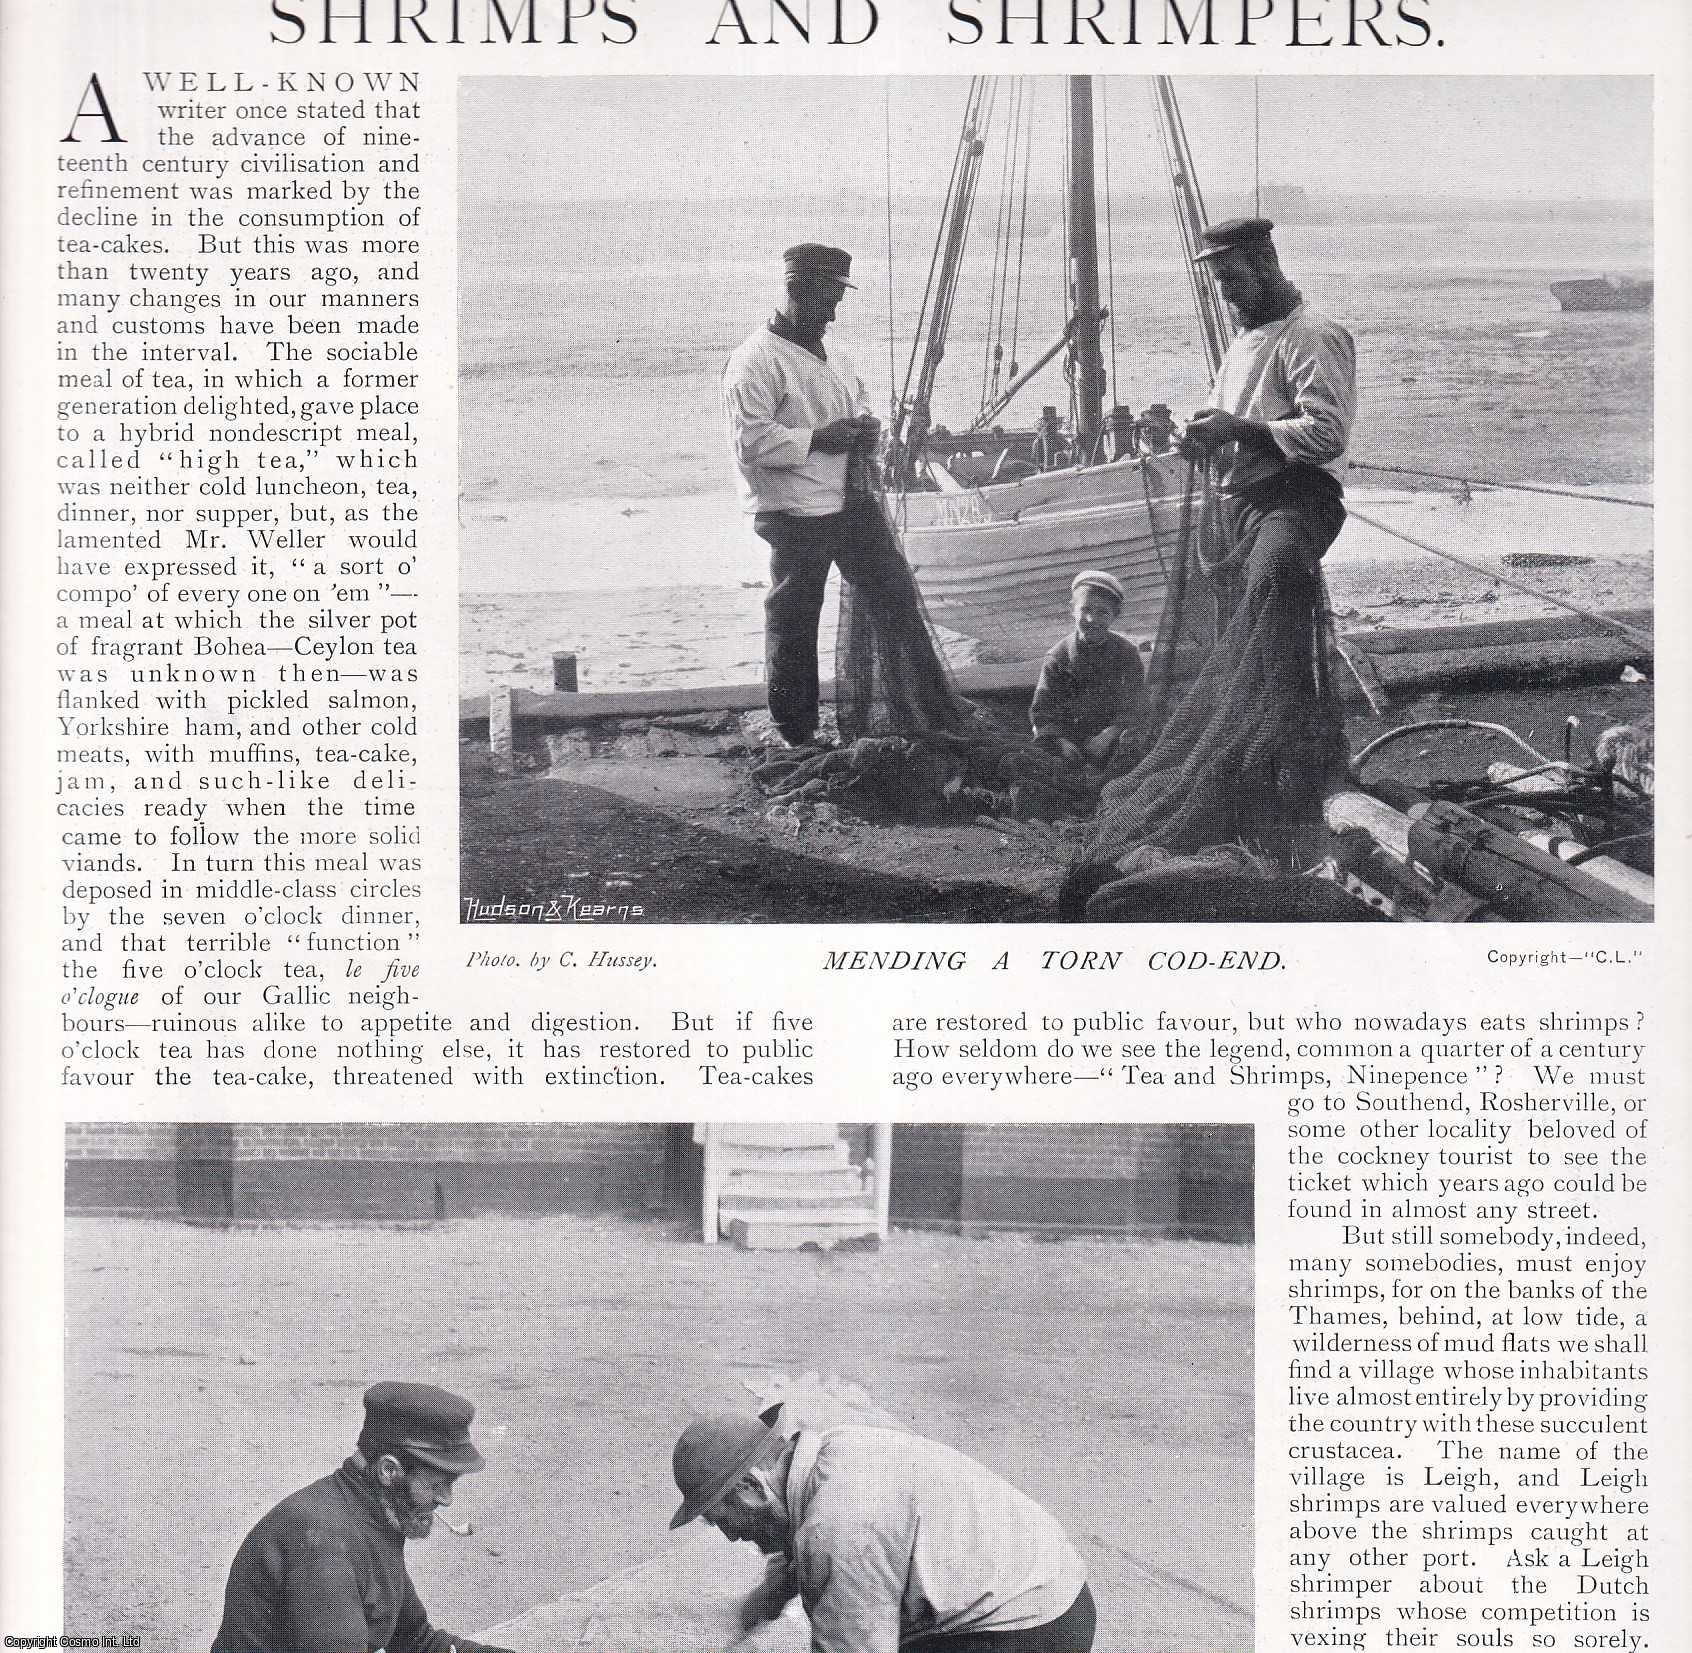 COUNTRY LIFE - Shrimps and Shrimpers. Several pictures and accompanying text, removed from an original issue of Country Life Magazine, 1897.